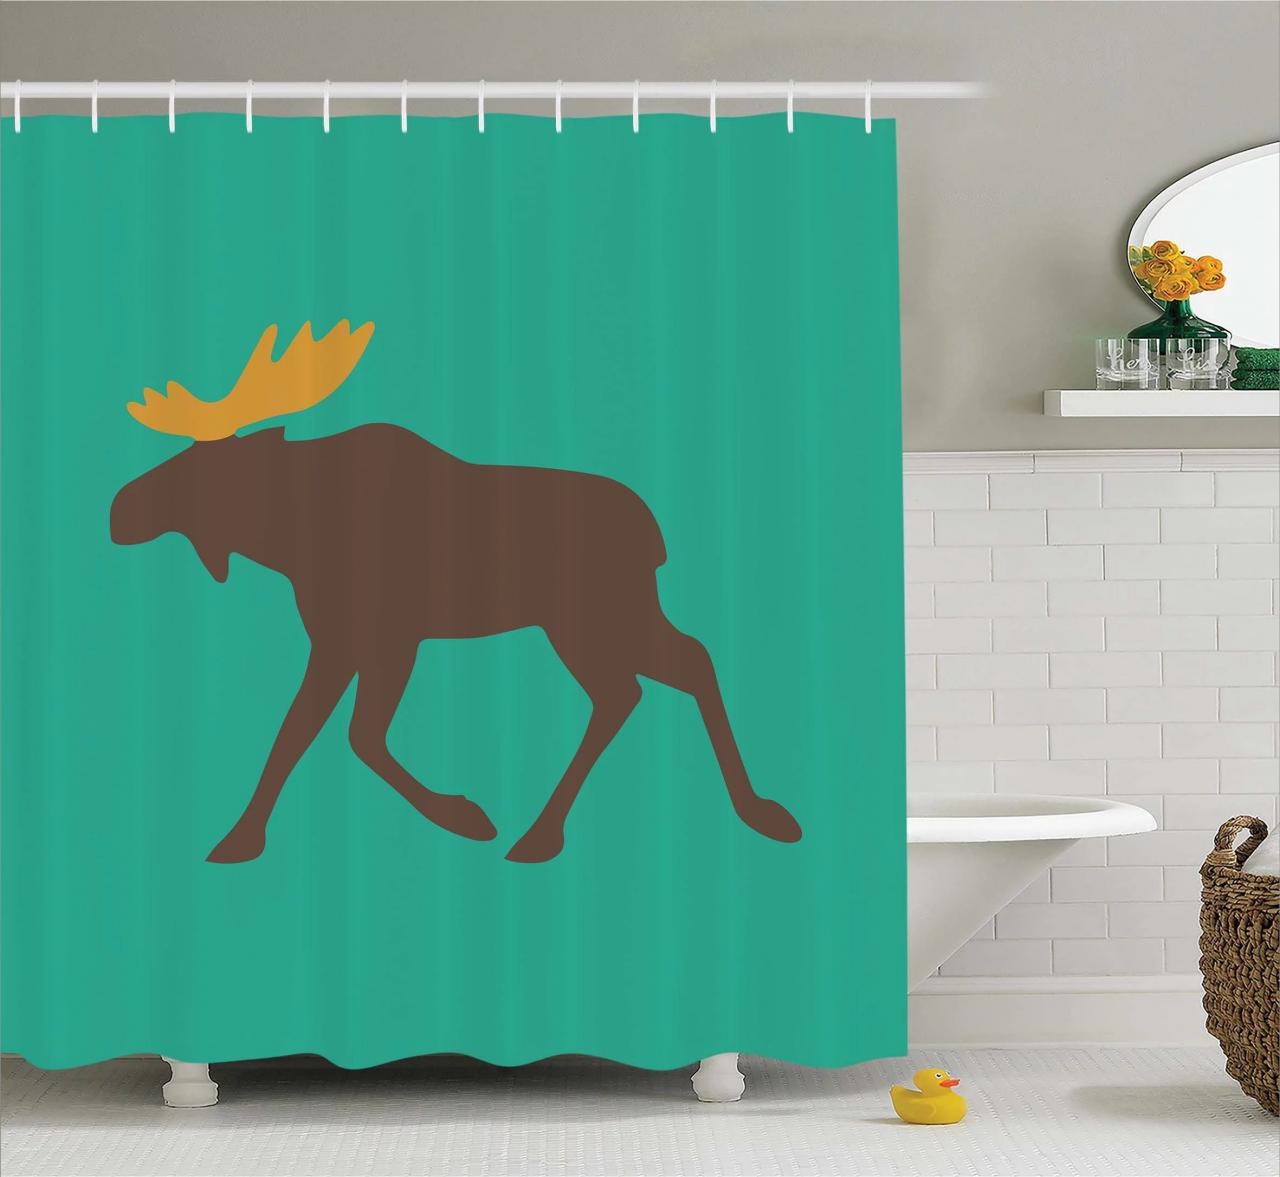 Moose Decor Shower Curtain, Moose with Antlers Illustration Deer Family